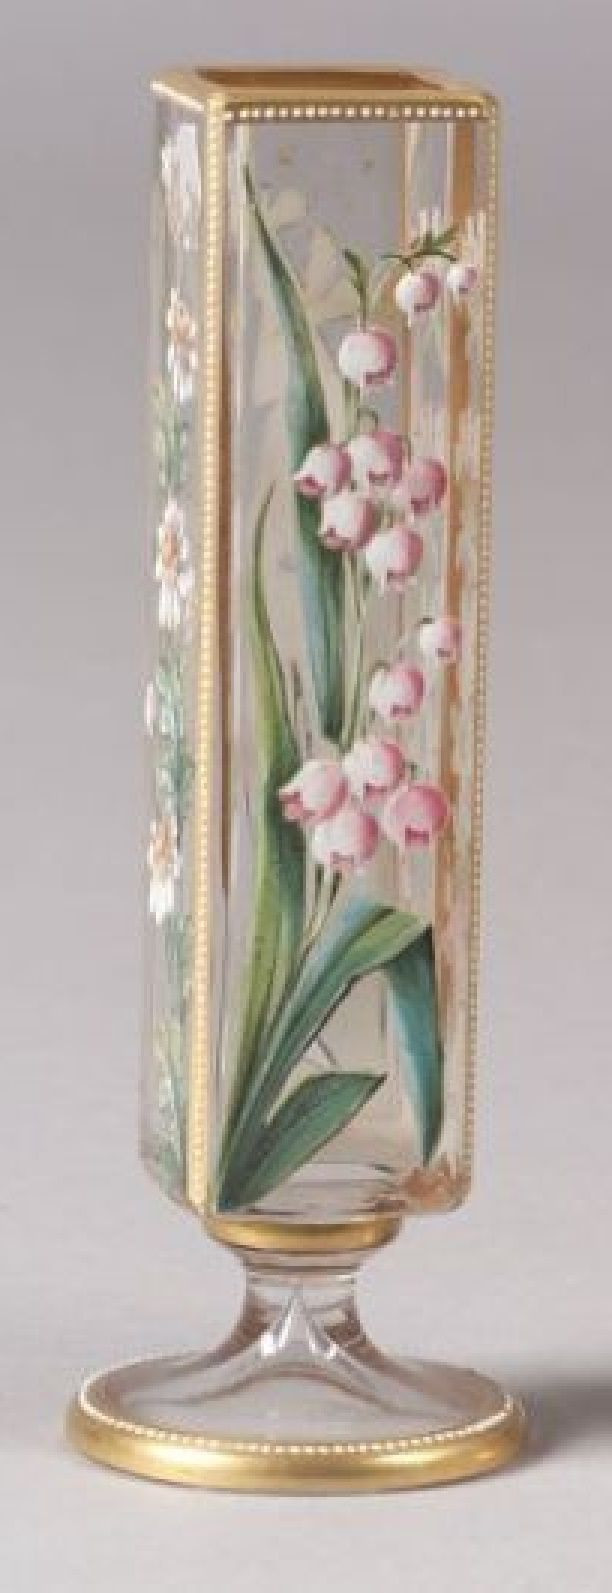 28 Fabulous Van Briggle Bud Vase 2024 free download van briggle bud vase of 1482 best glass its beauty its art its amazing images on throughout enameled glass vases possibly lobmeyer austria late century